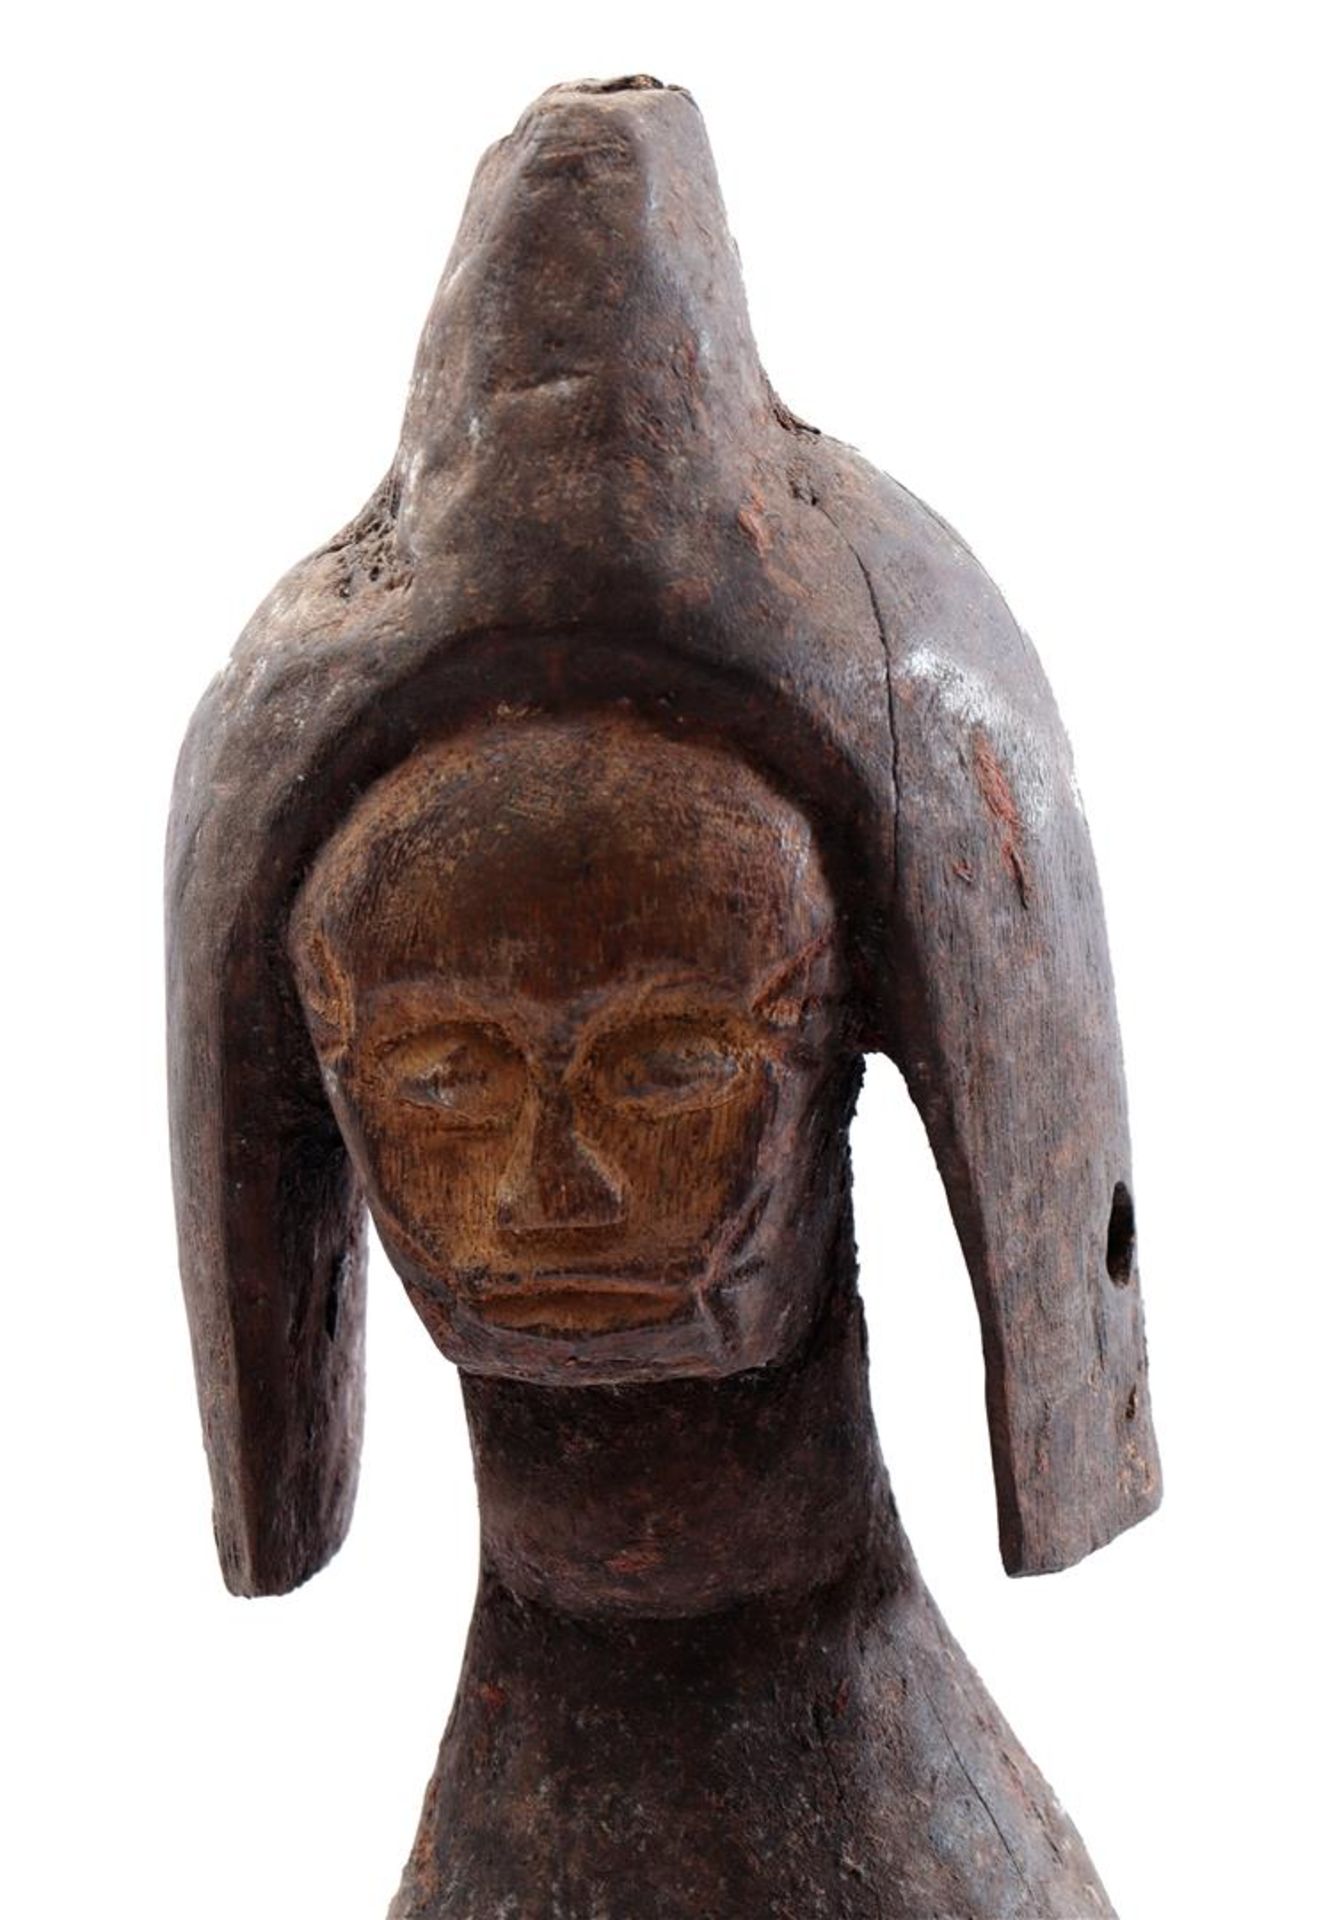 Wooden ceremonial statue of a woman - Image 5 of 5